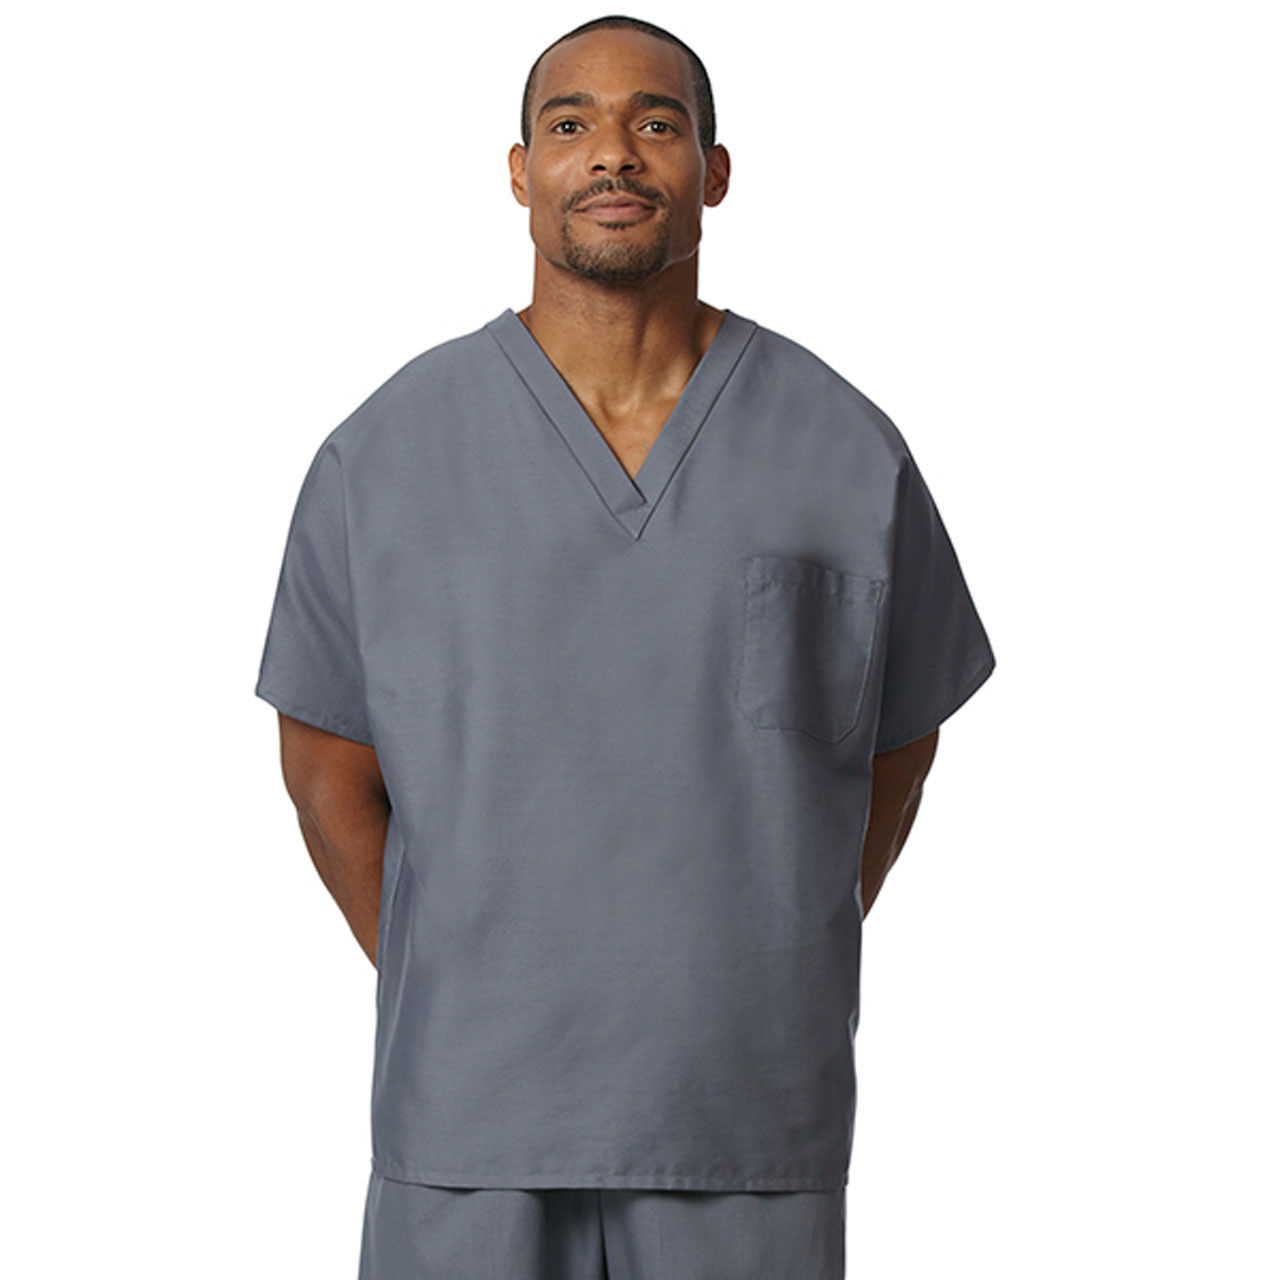 What is the fabric composition of the Womens and Mens Tall Scrub Tops?